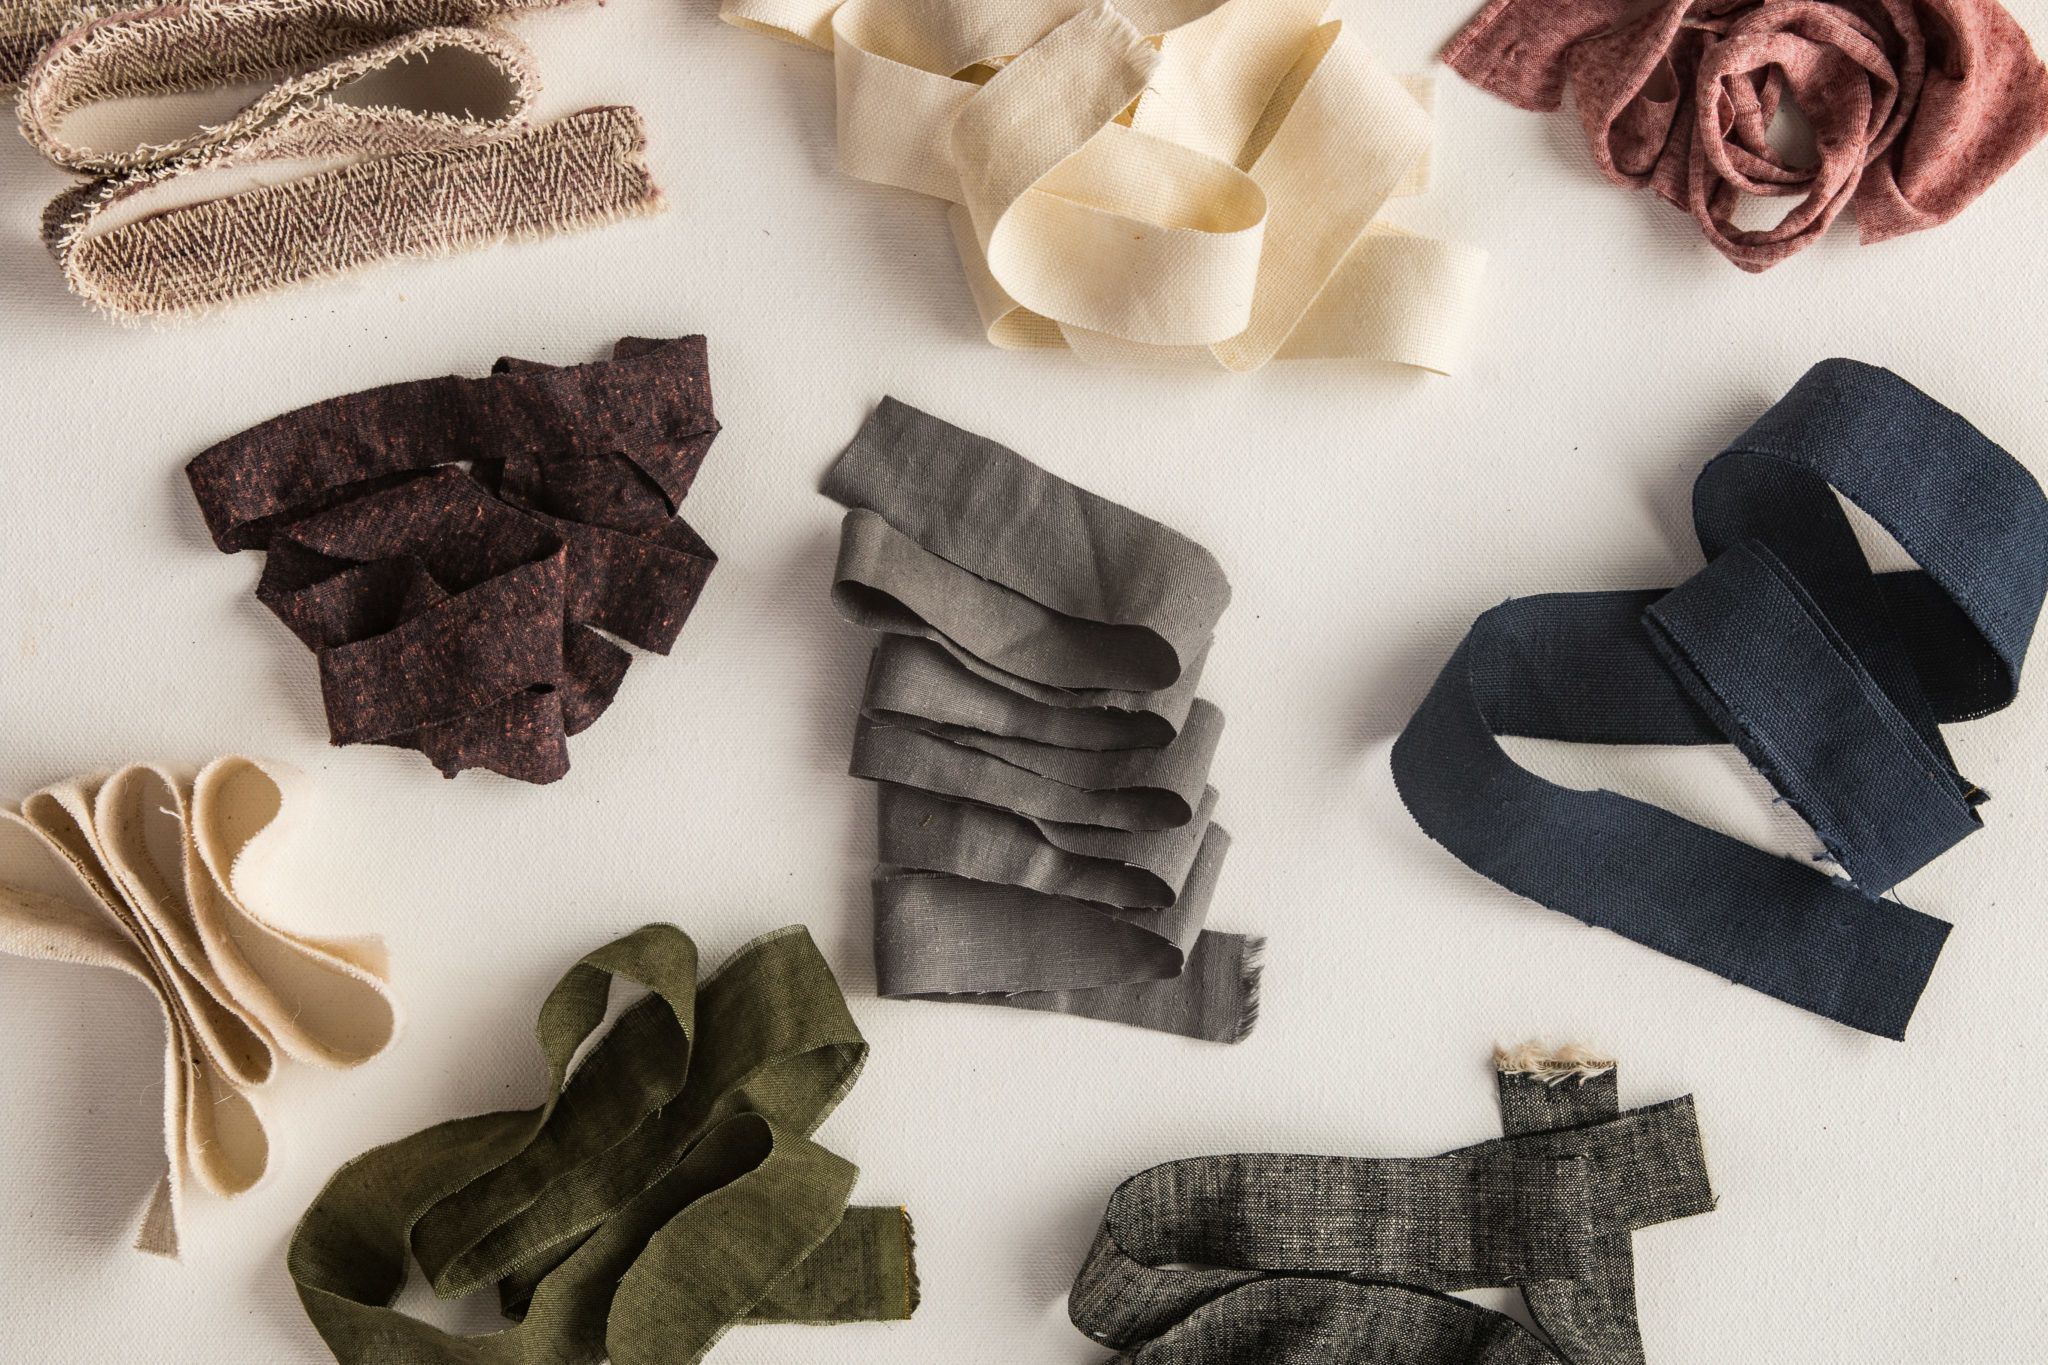 A collection of hemp fabric in a variety of colors and textures from Hemp Fabric Lab.